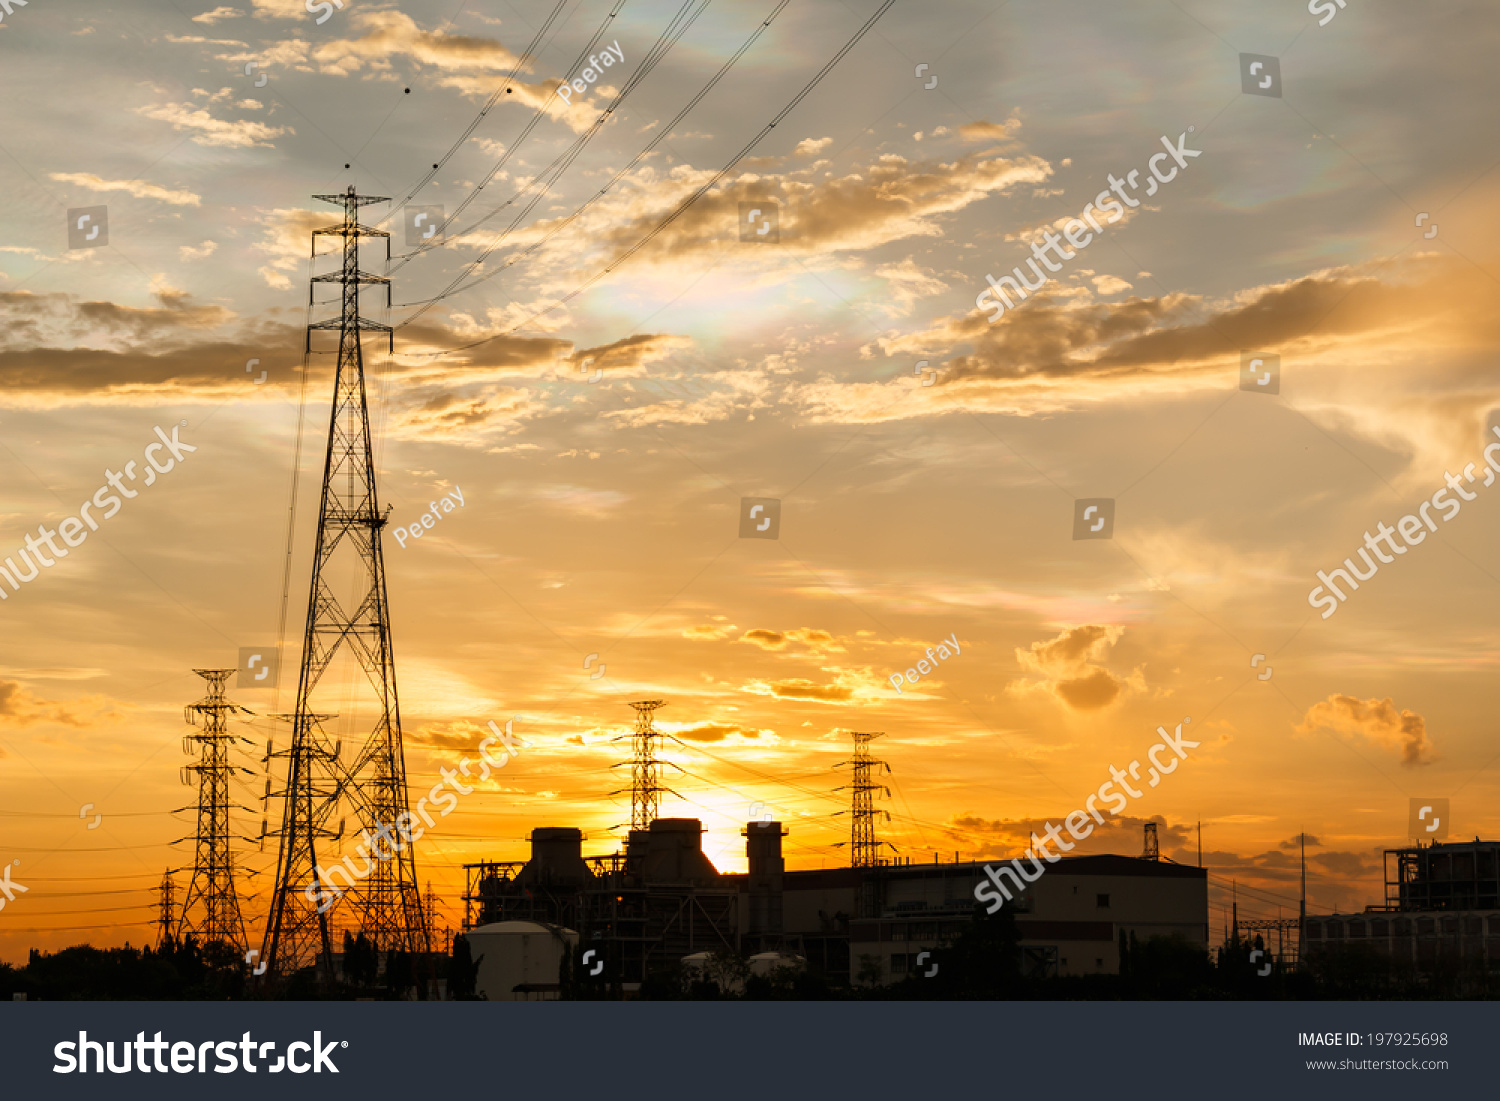 Electric power plant at sunrise #197925698